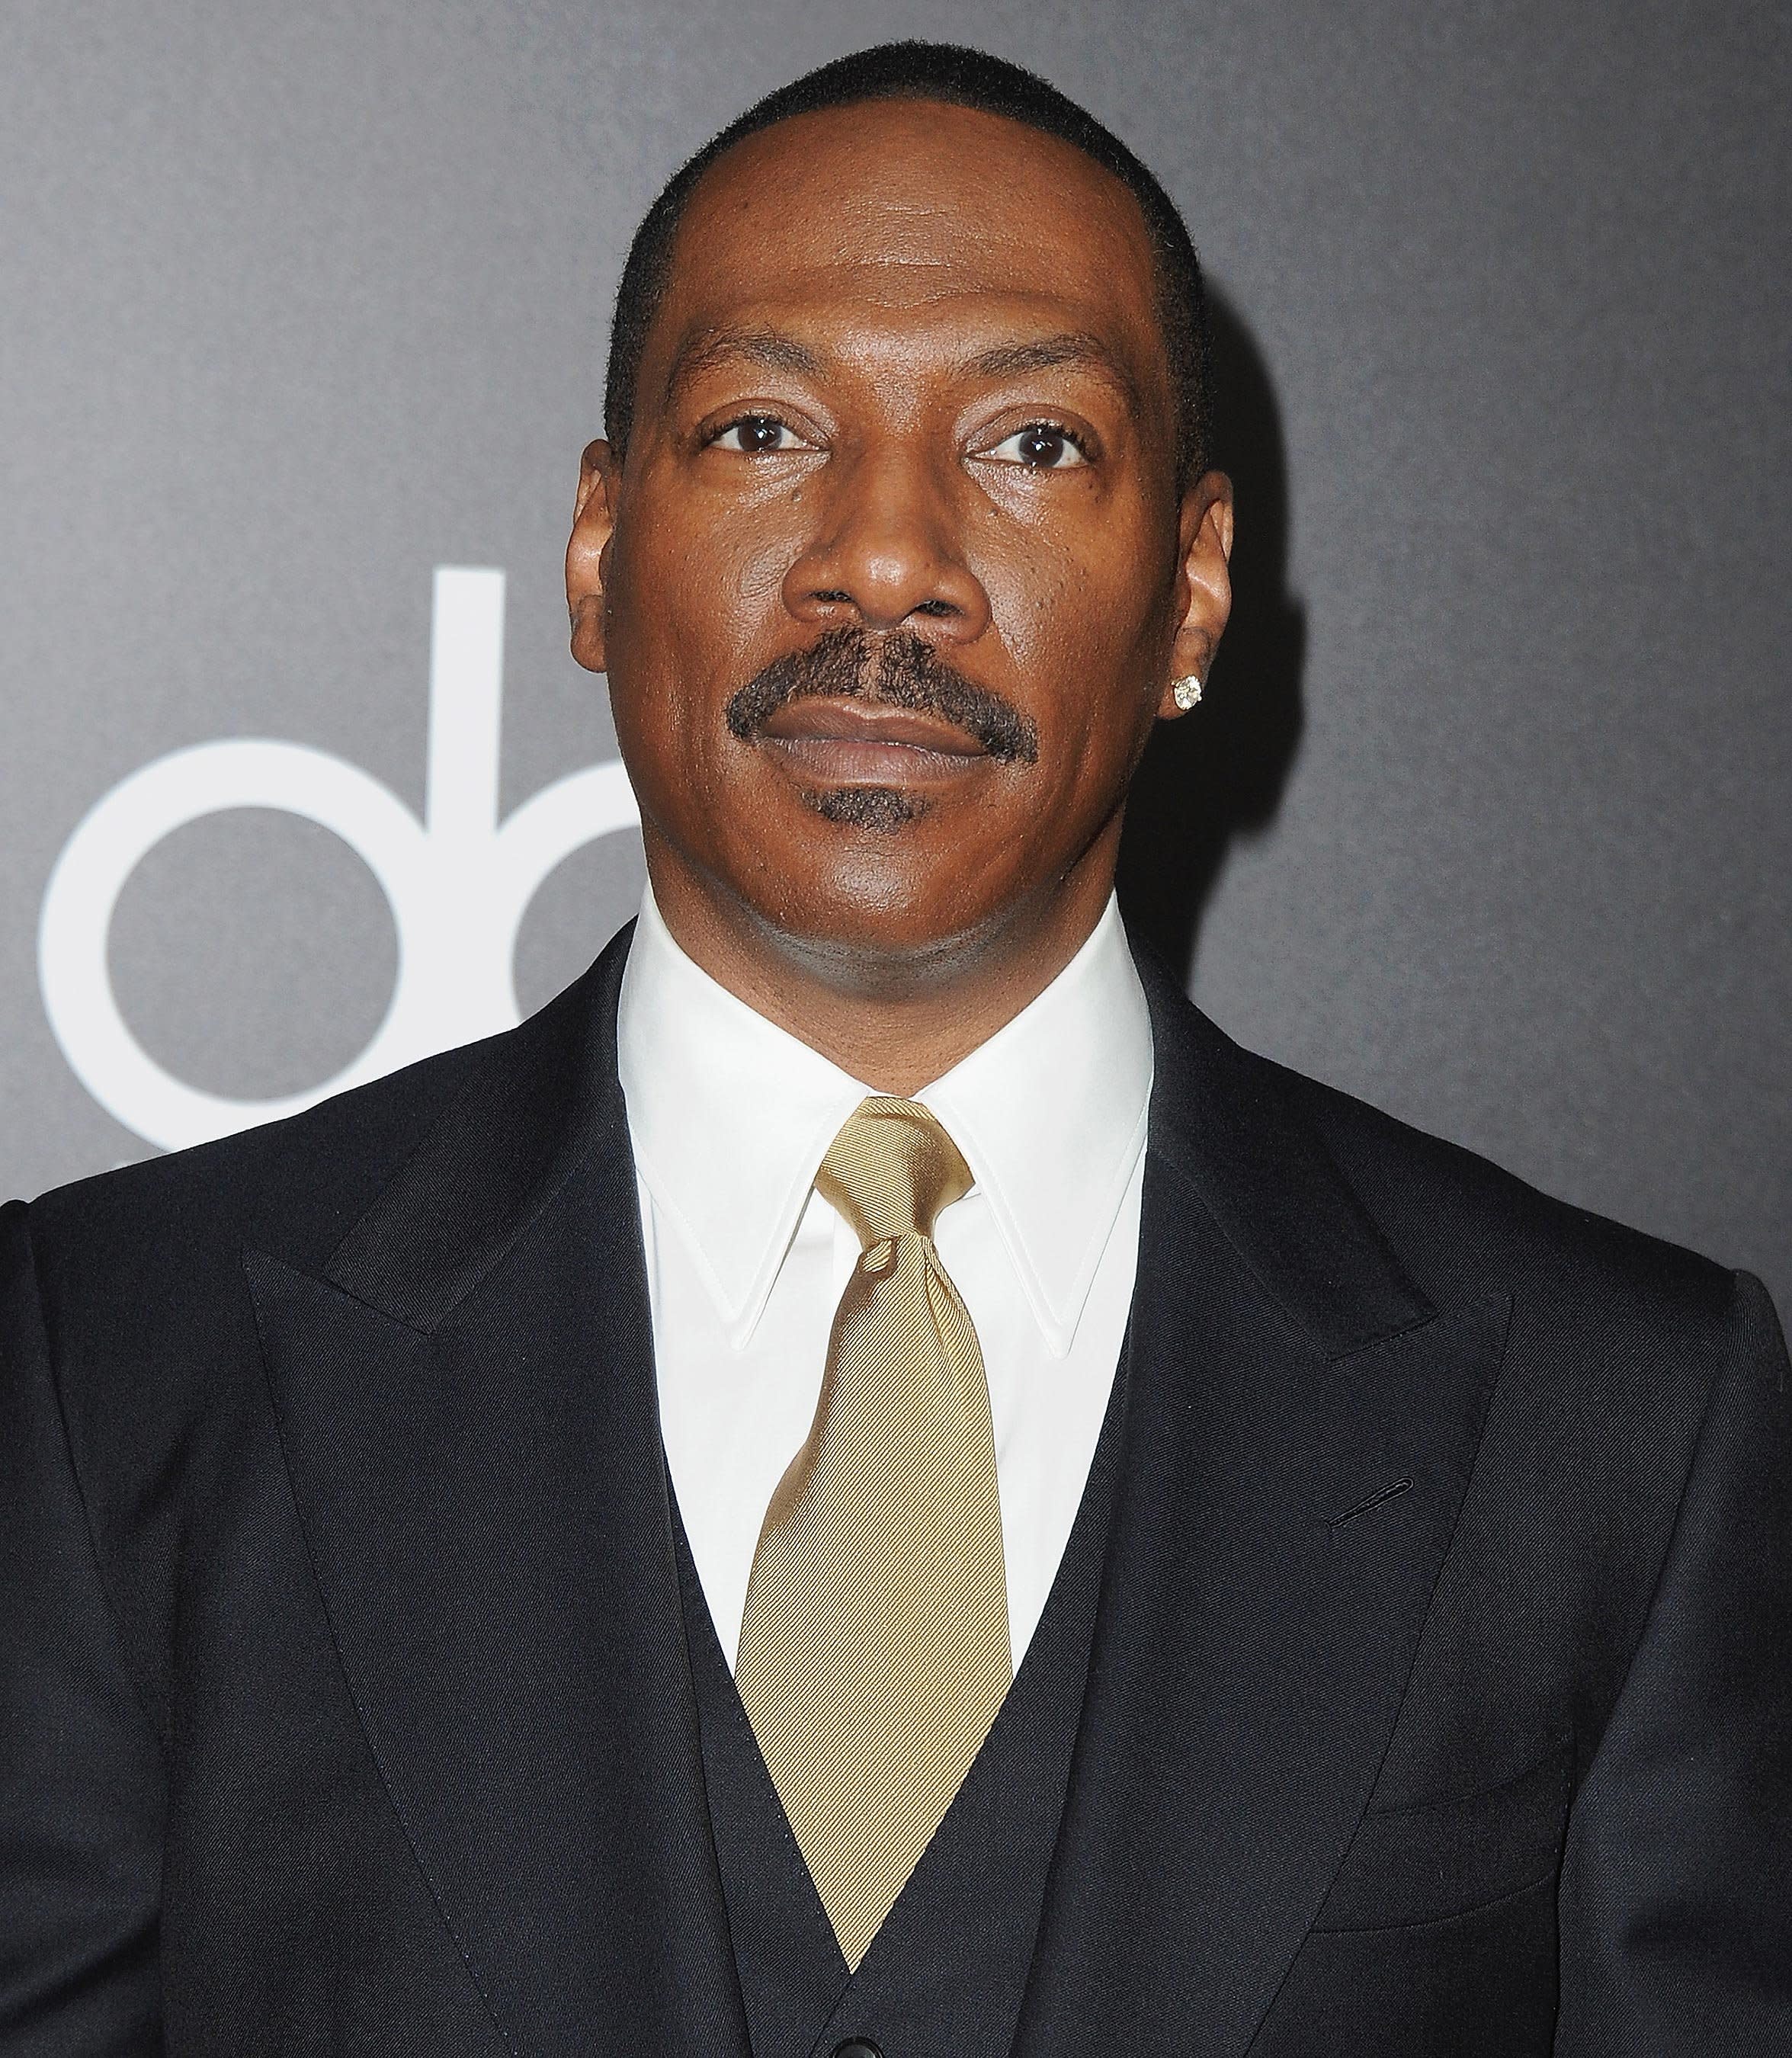 Eddie Murphy says he's going on a standup tour in 2020